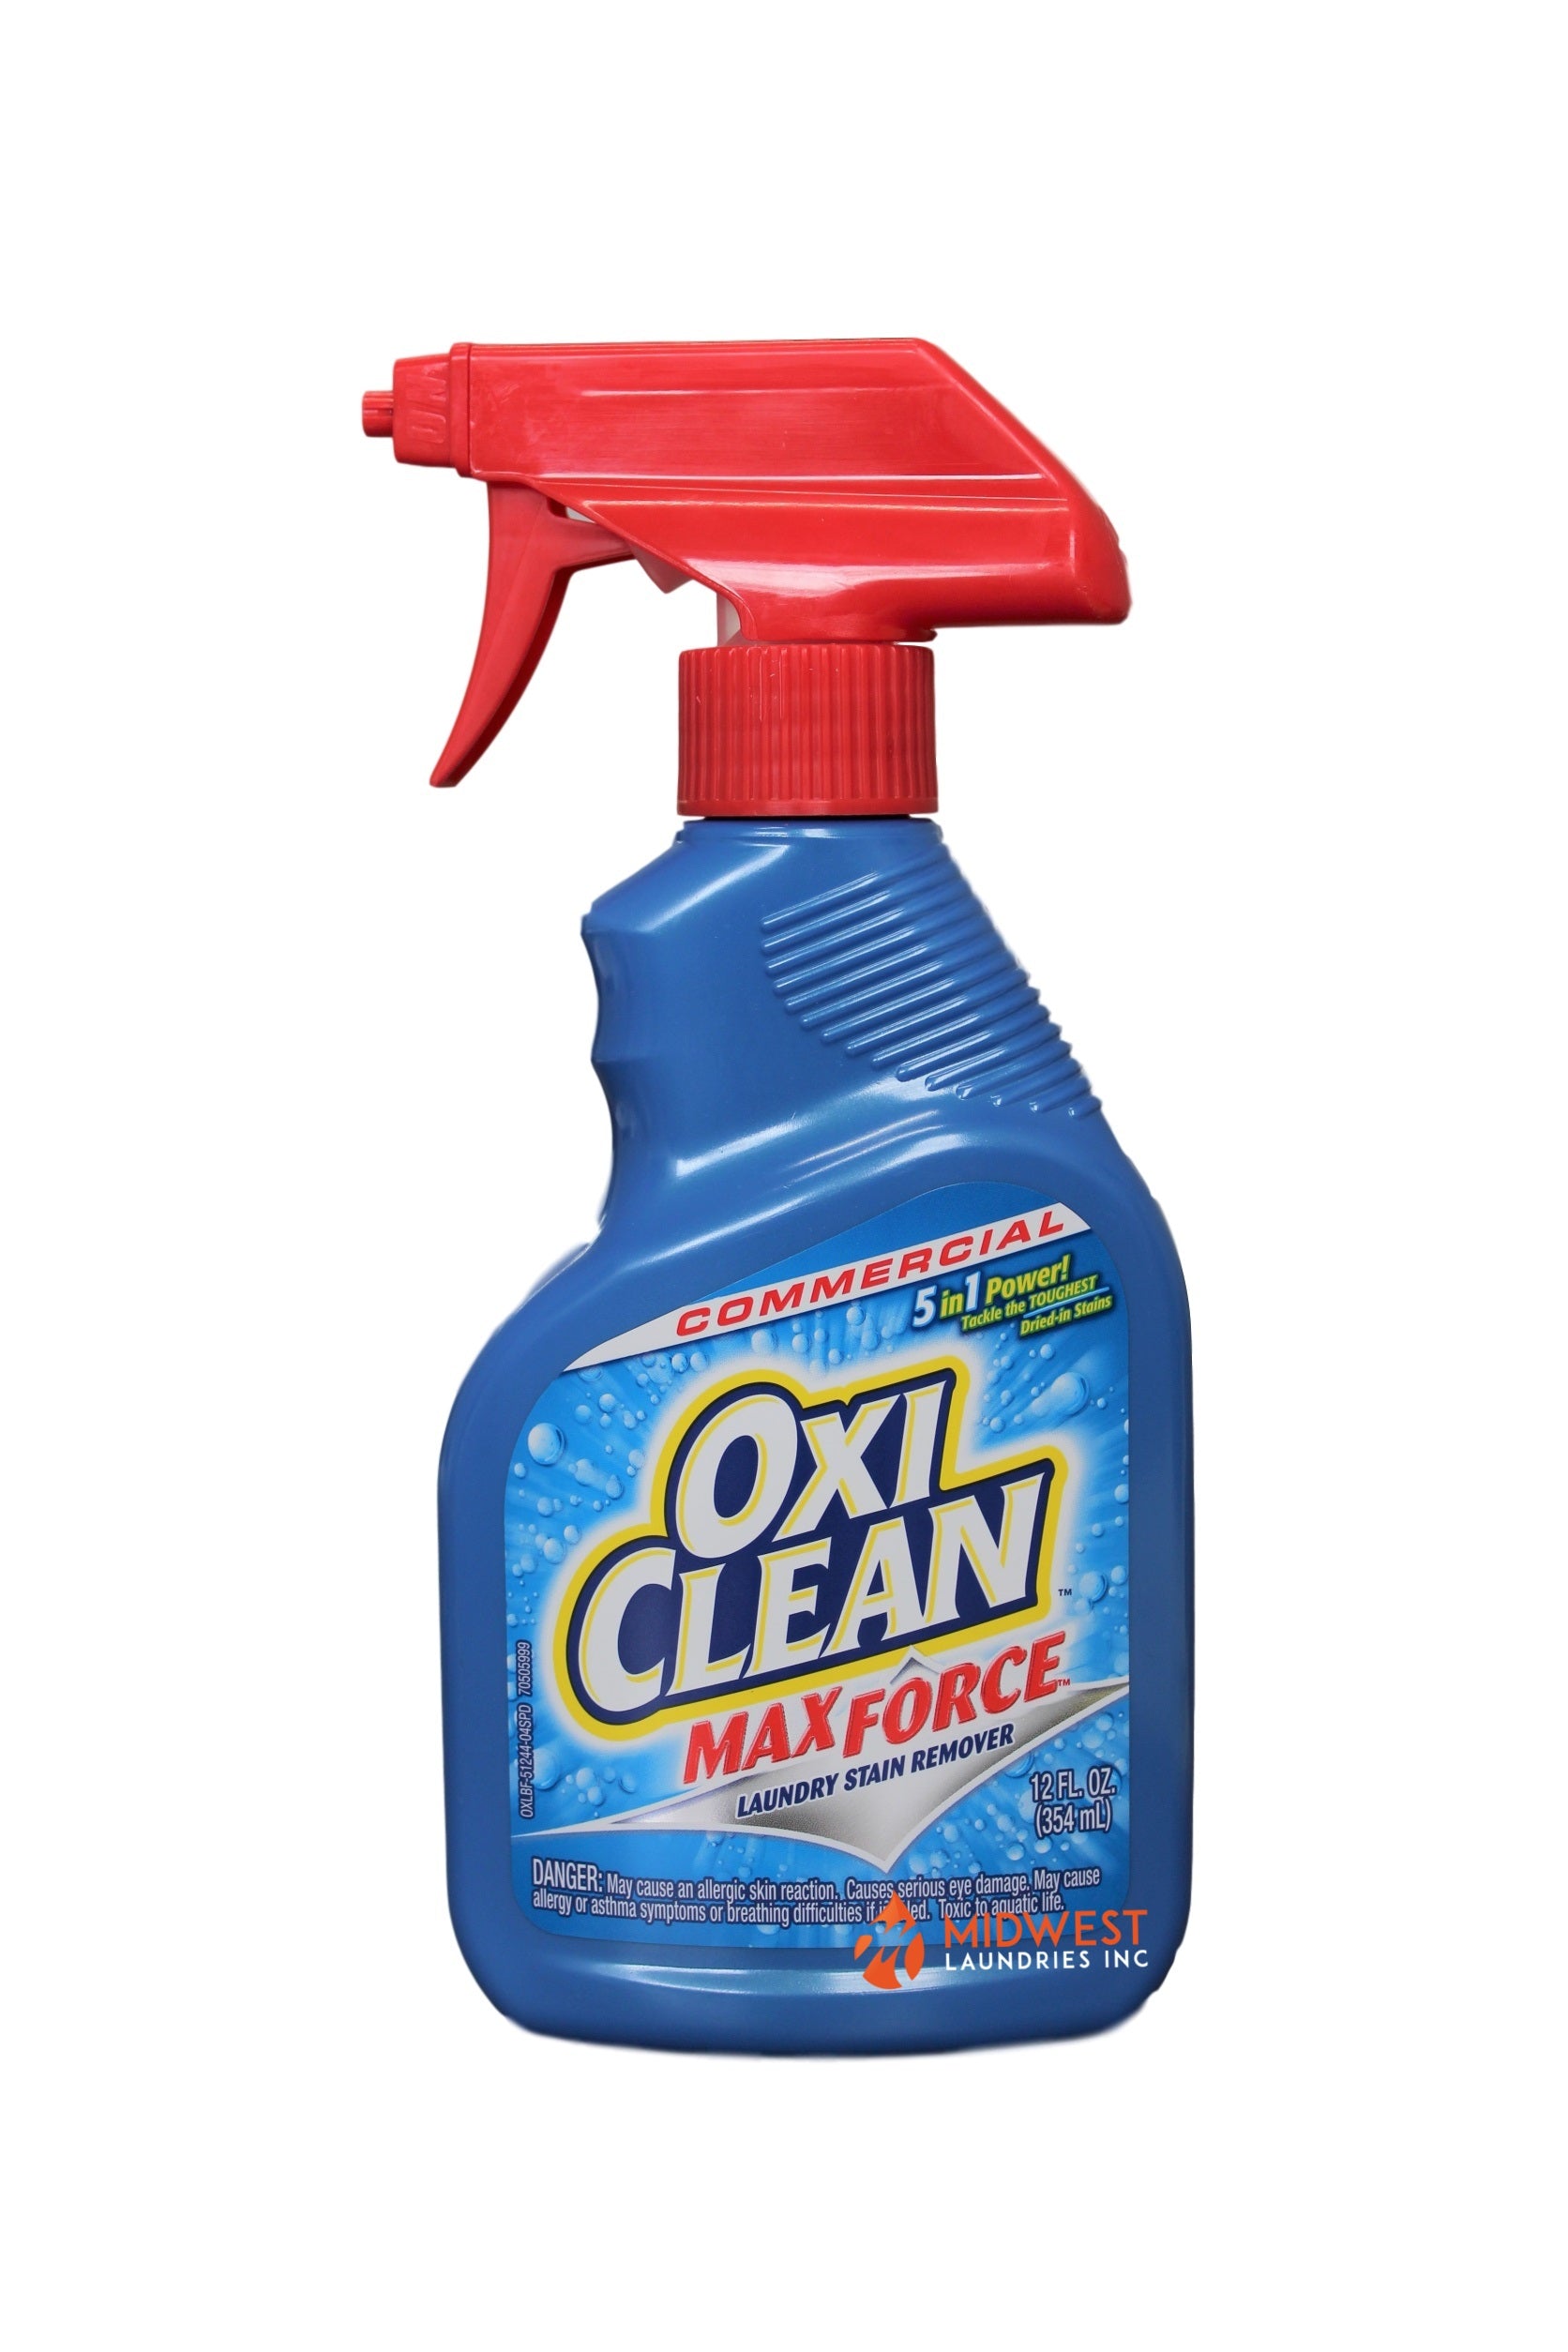 OxiClean Max Force Stain Remover, 12oz - 12ct